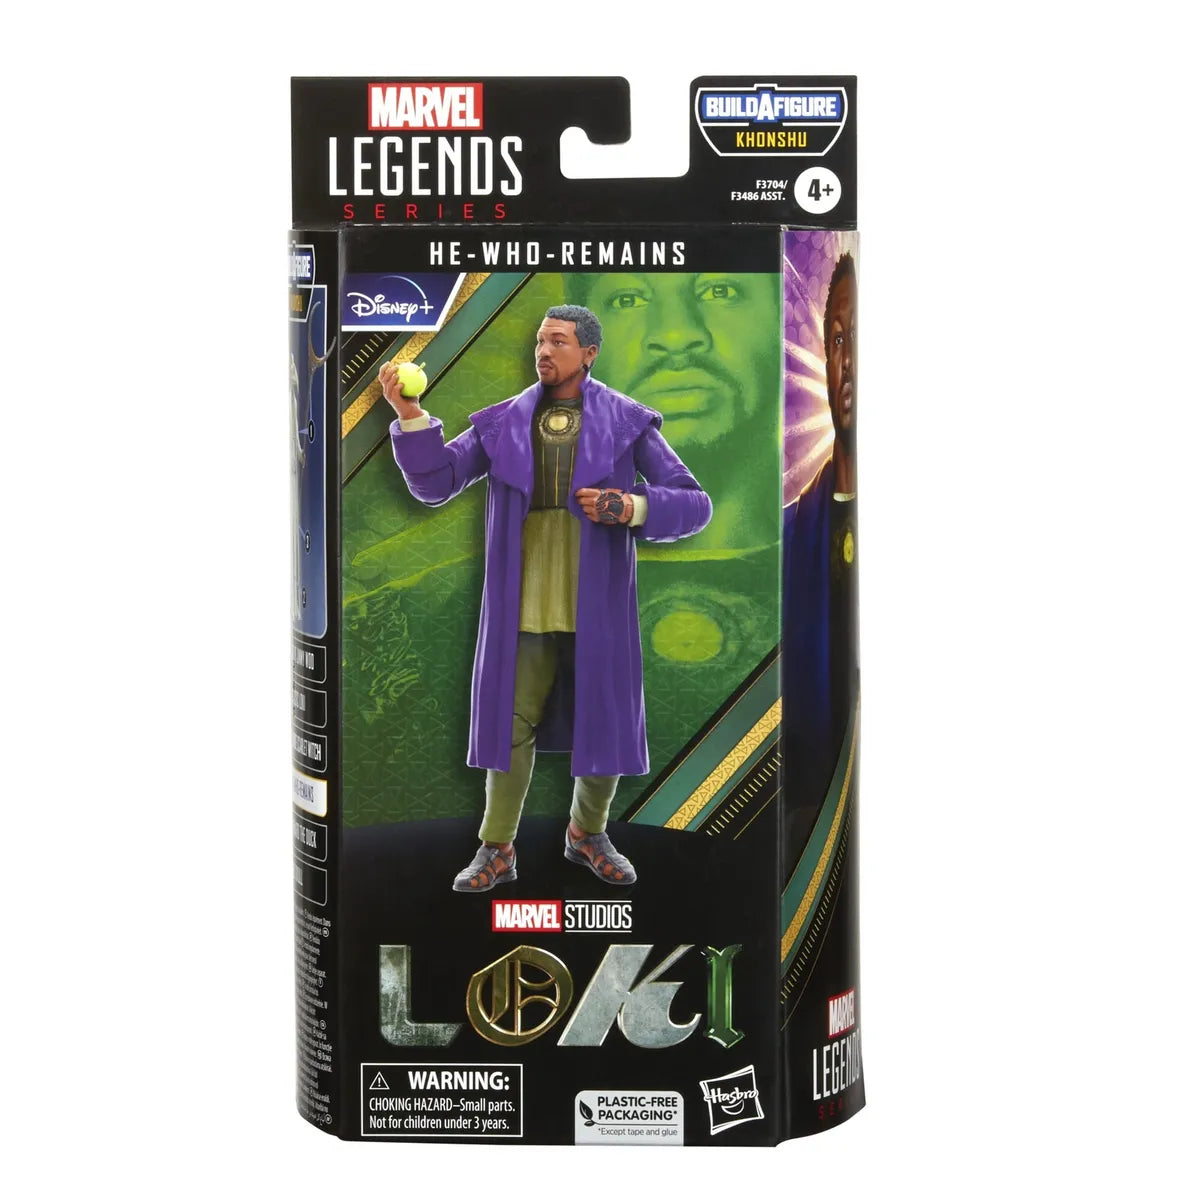 Marvel Legends: He-Who-Remains